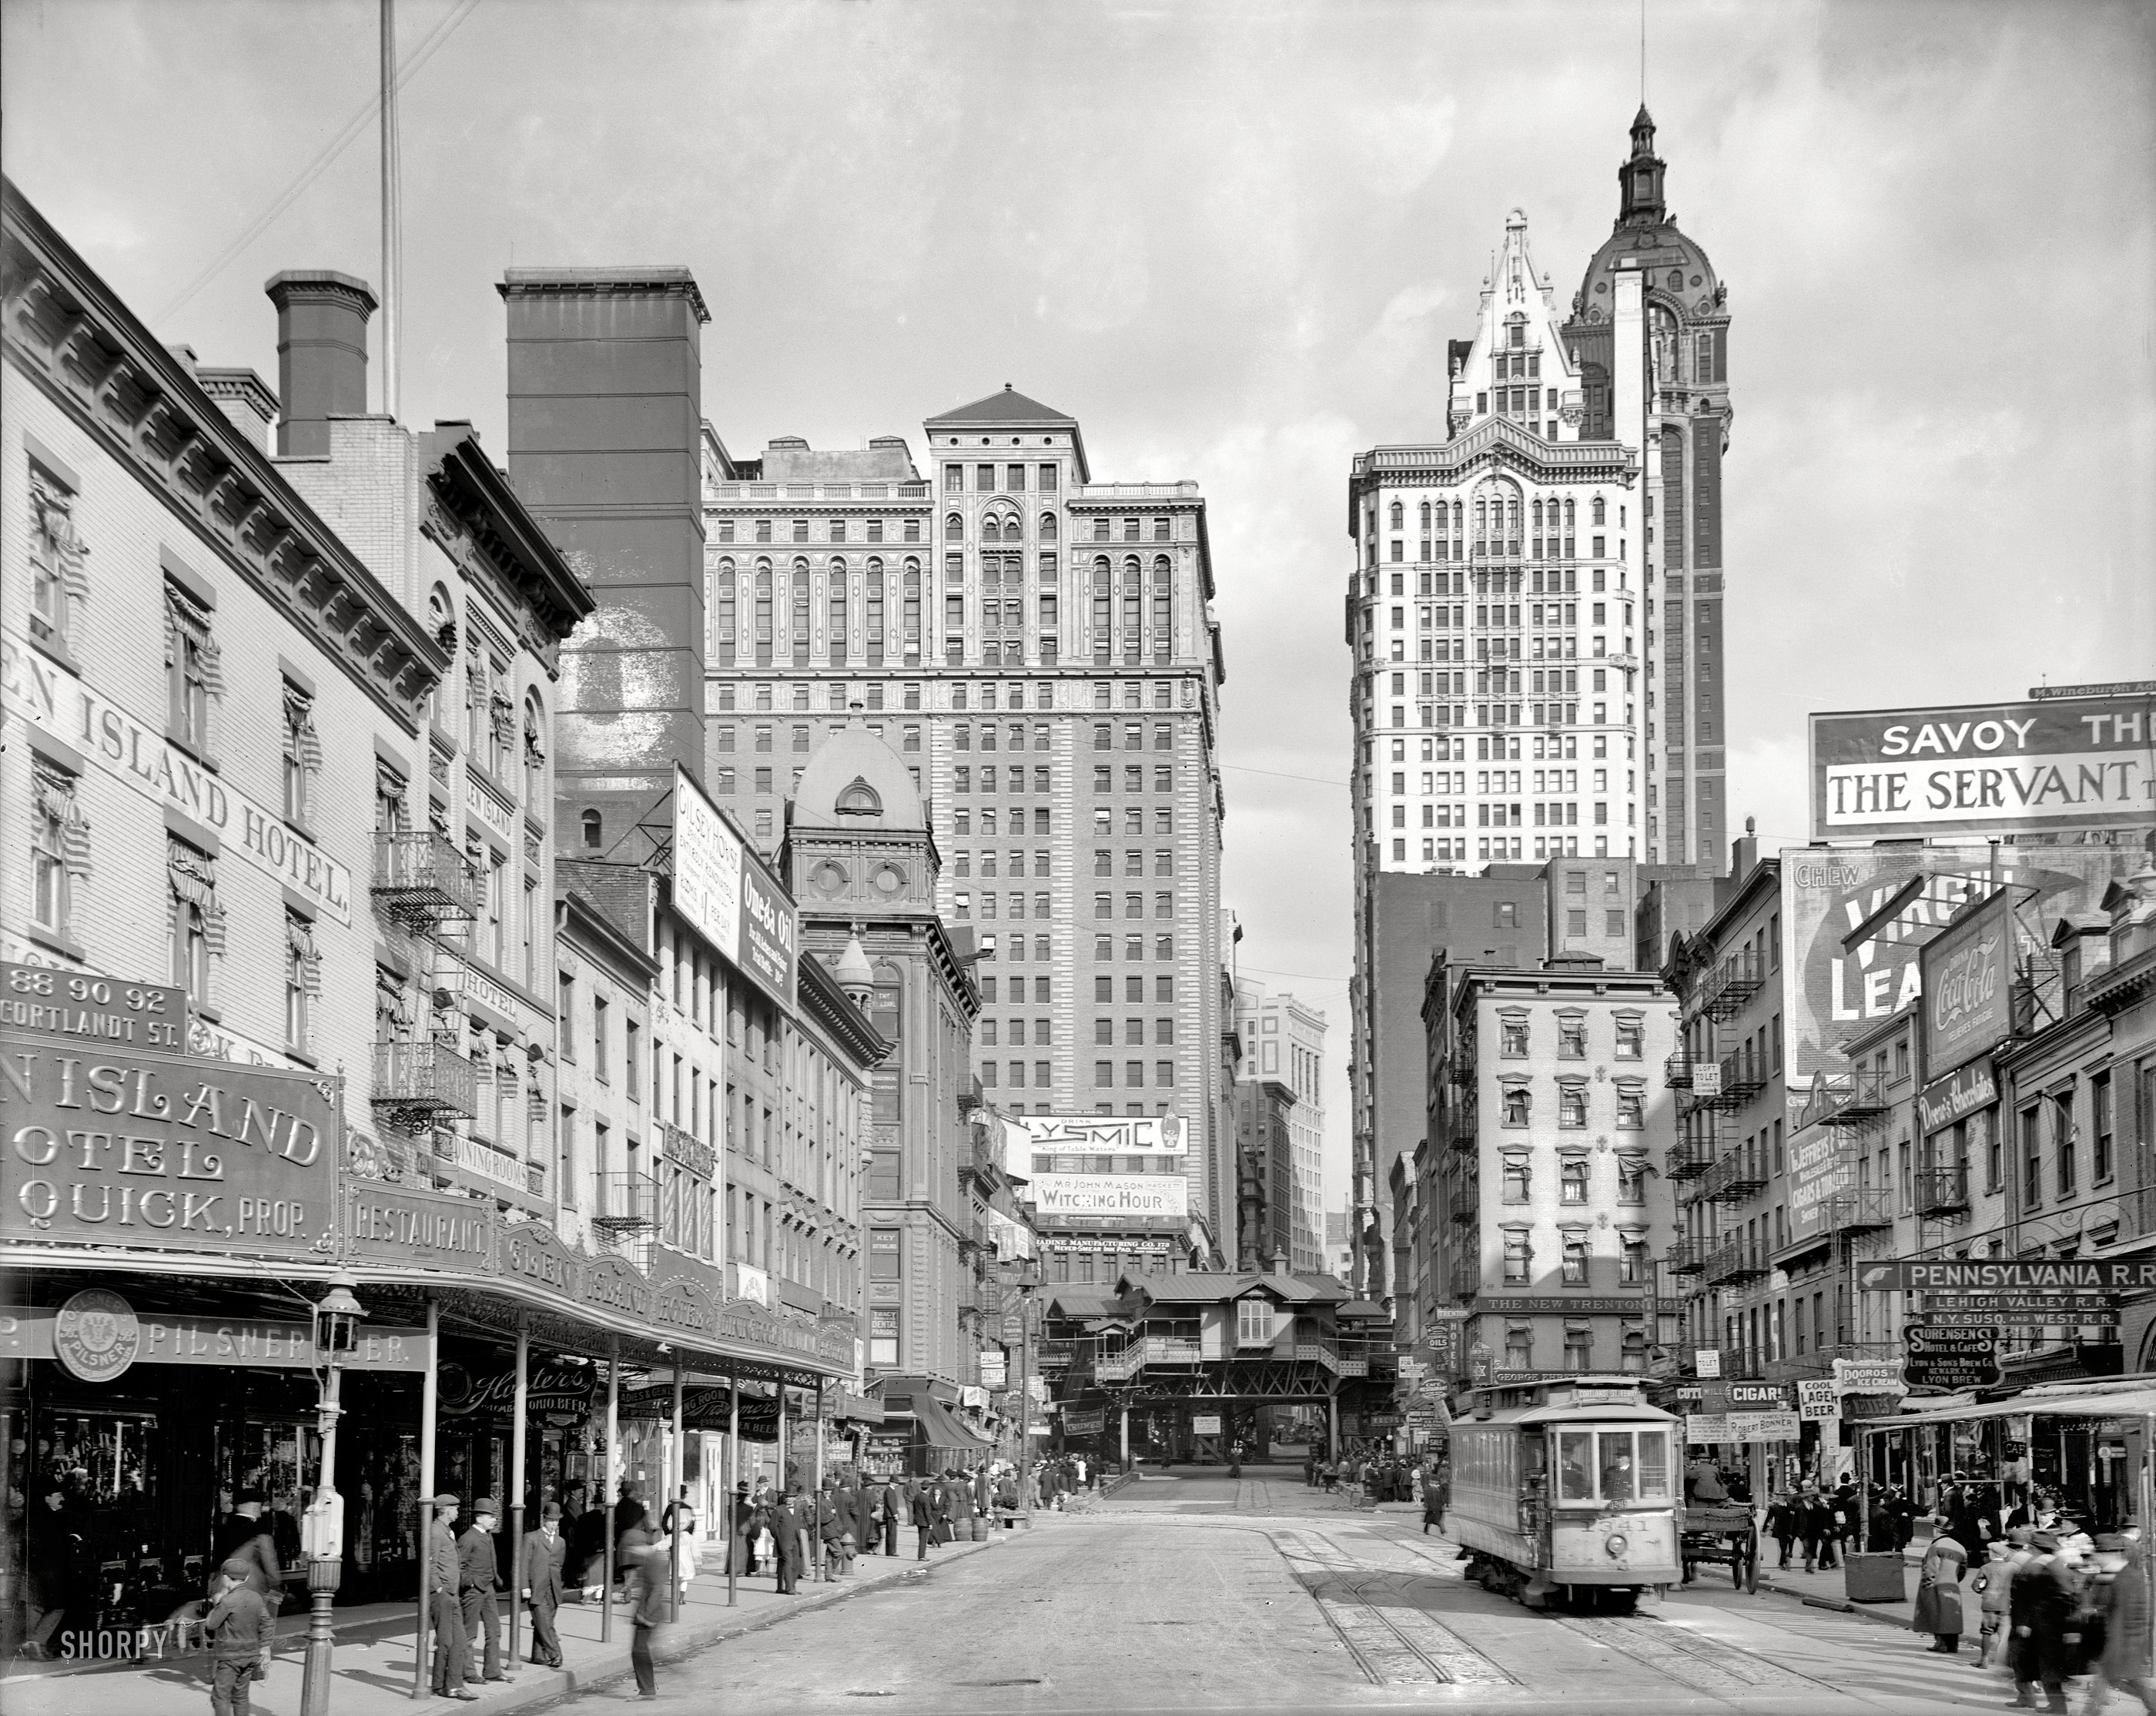 New York circa 1908. "Cortlandt Street." Lapping at the balmy shores of the Glen Island Hotel, with the new Singer Building rising in the distance. 8x10 inch dry plate glass negative, Detroit Publishing Company. View full size.